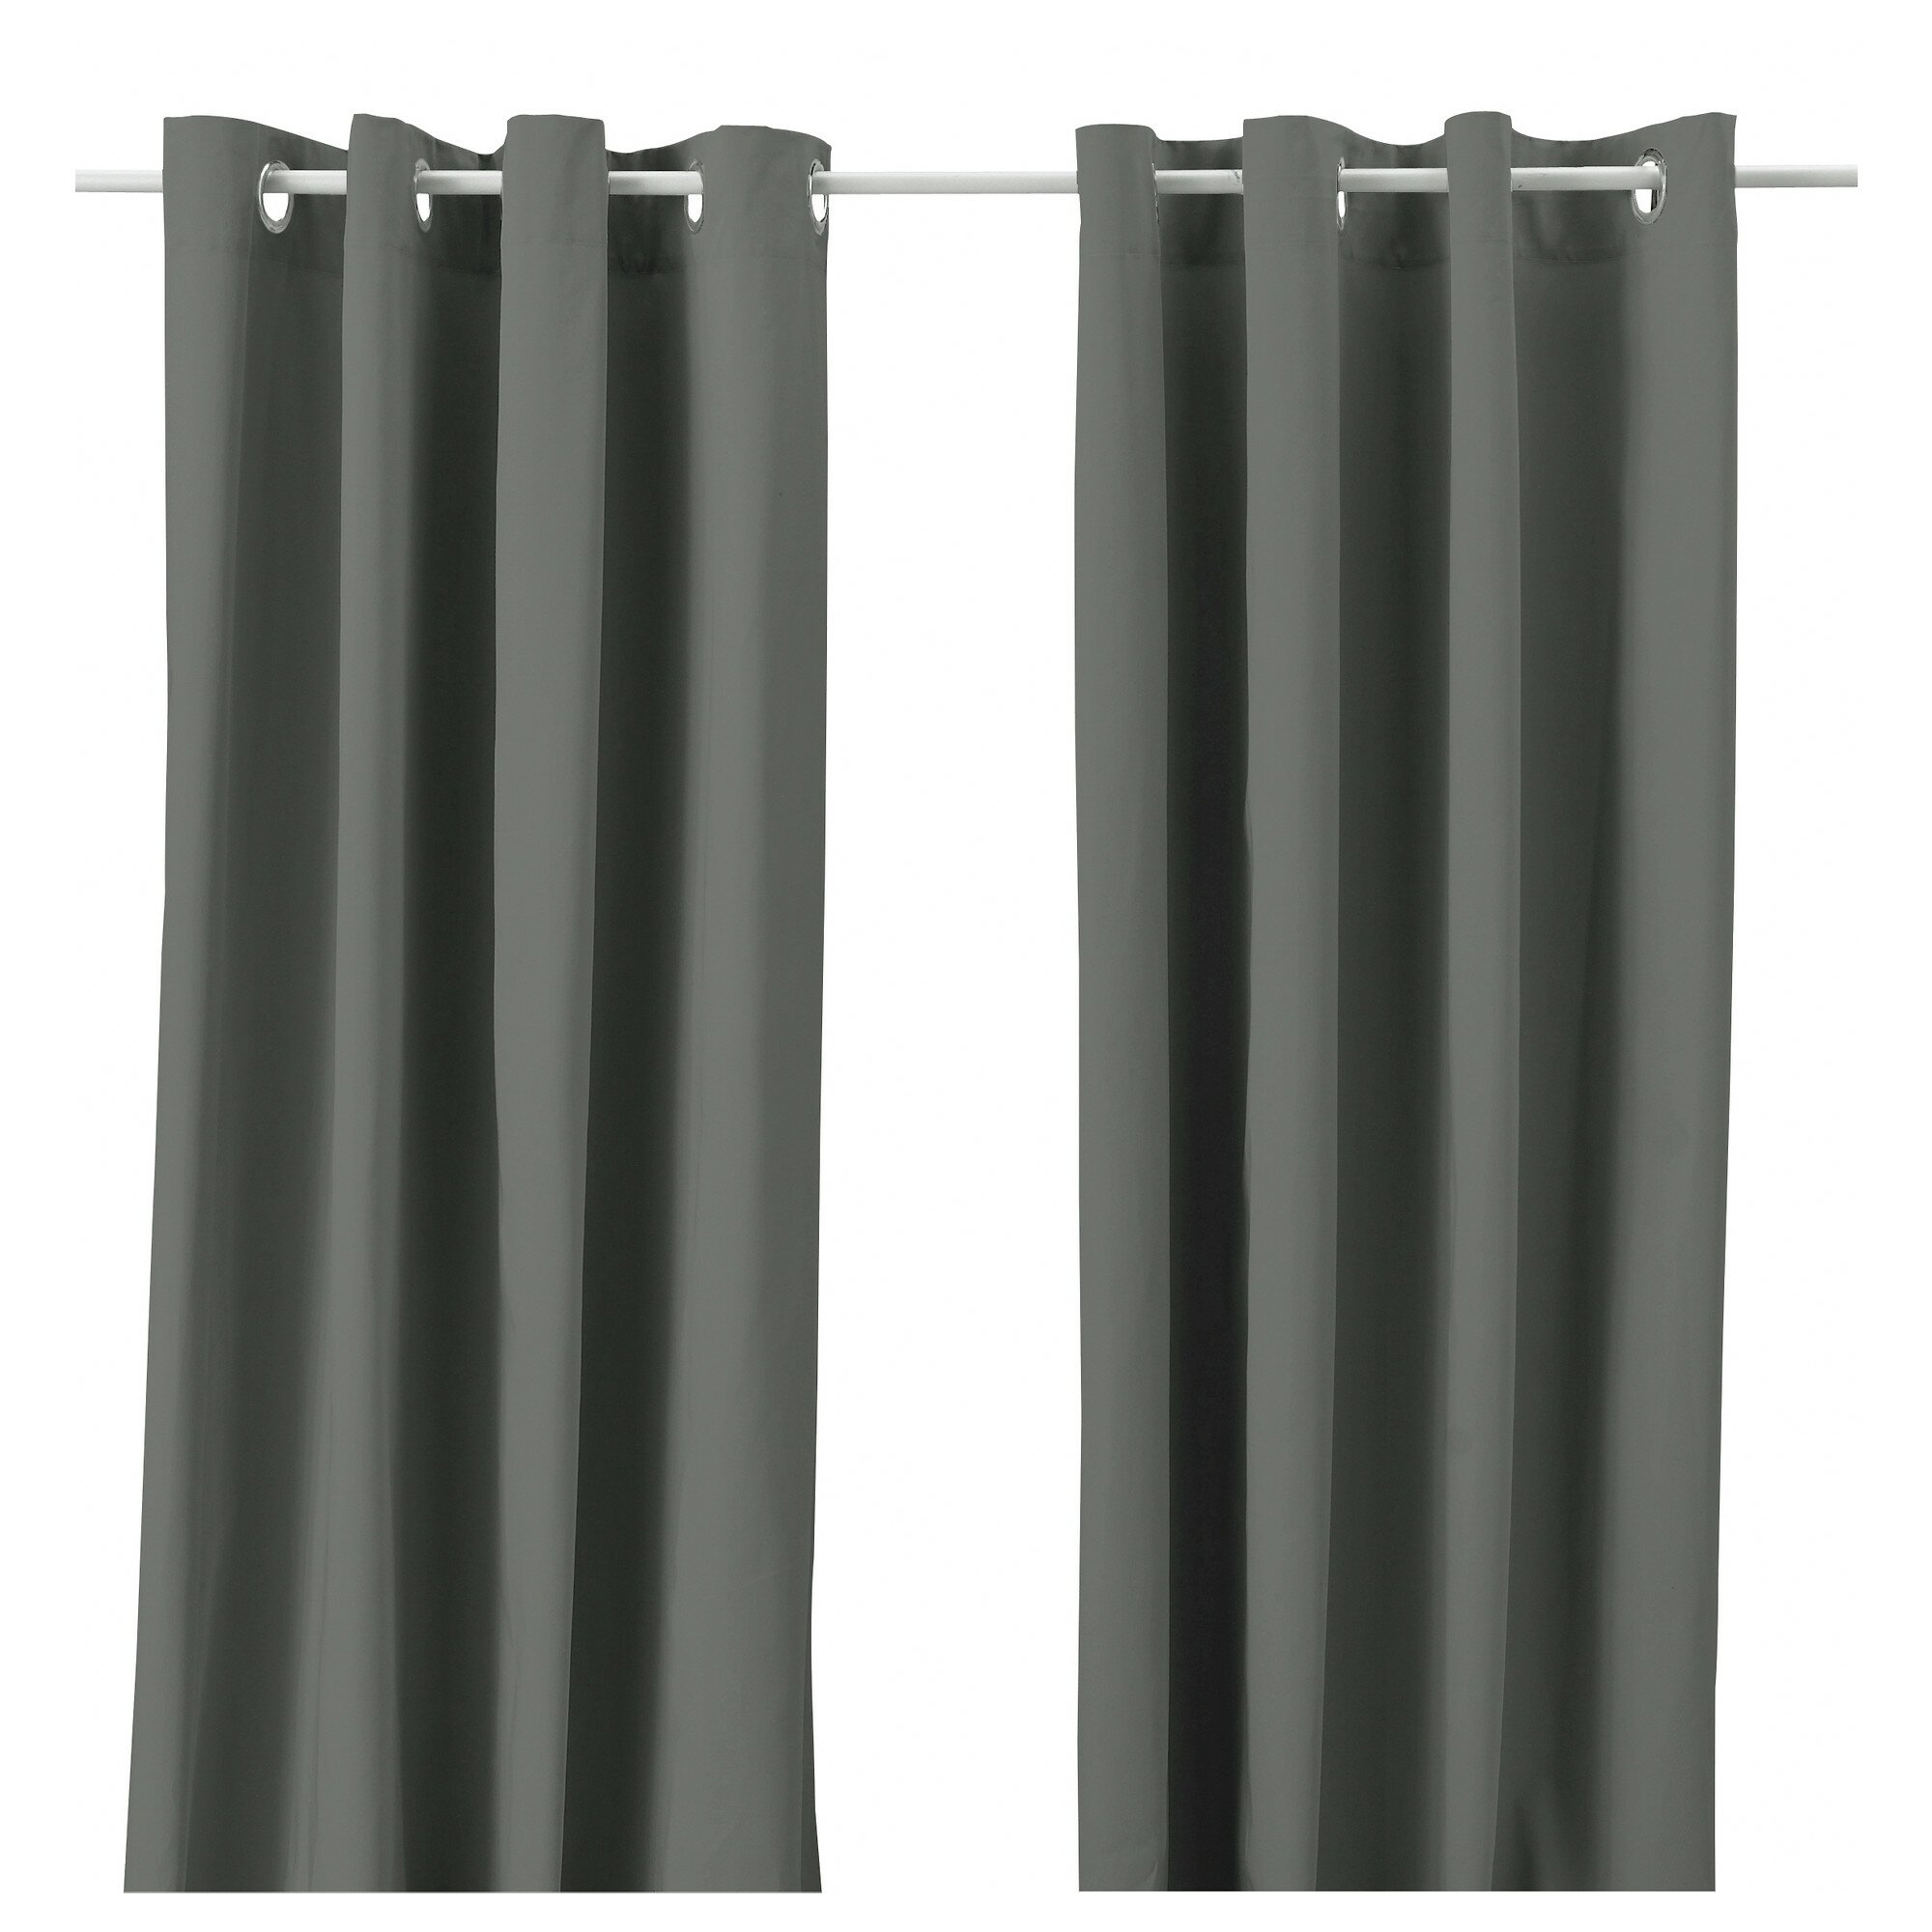 Low Priced Curtains | Cheap Blackout Curtains | Thermal Drapes Clearance